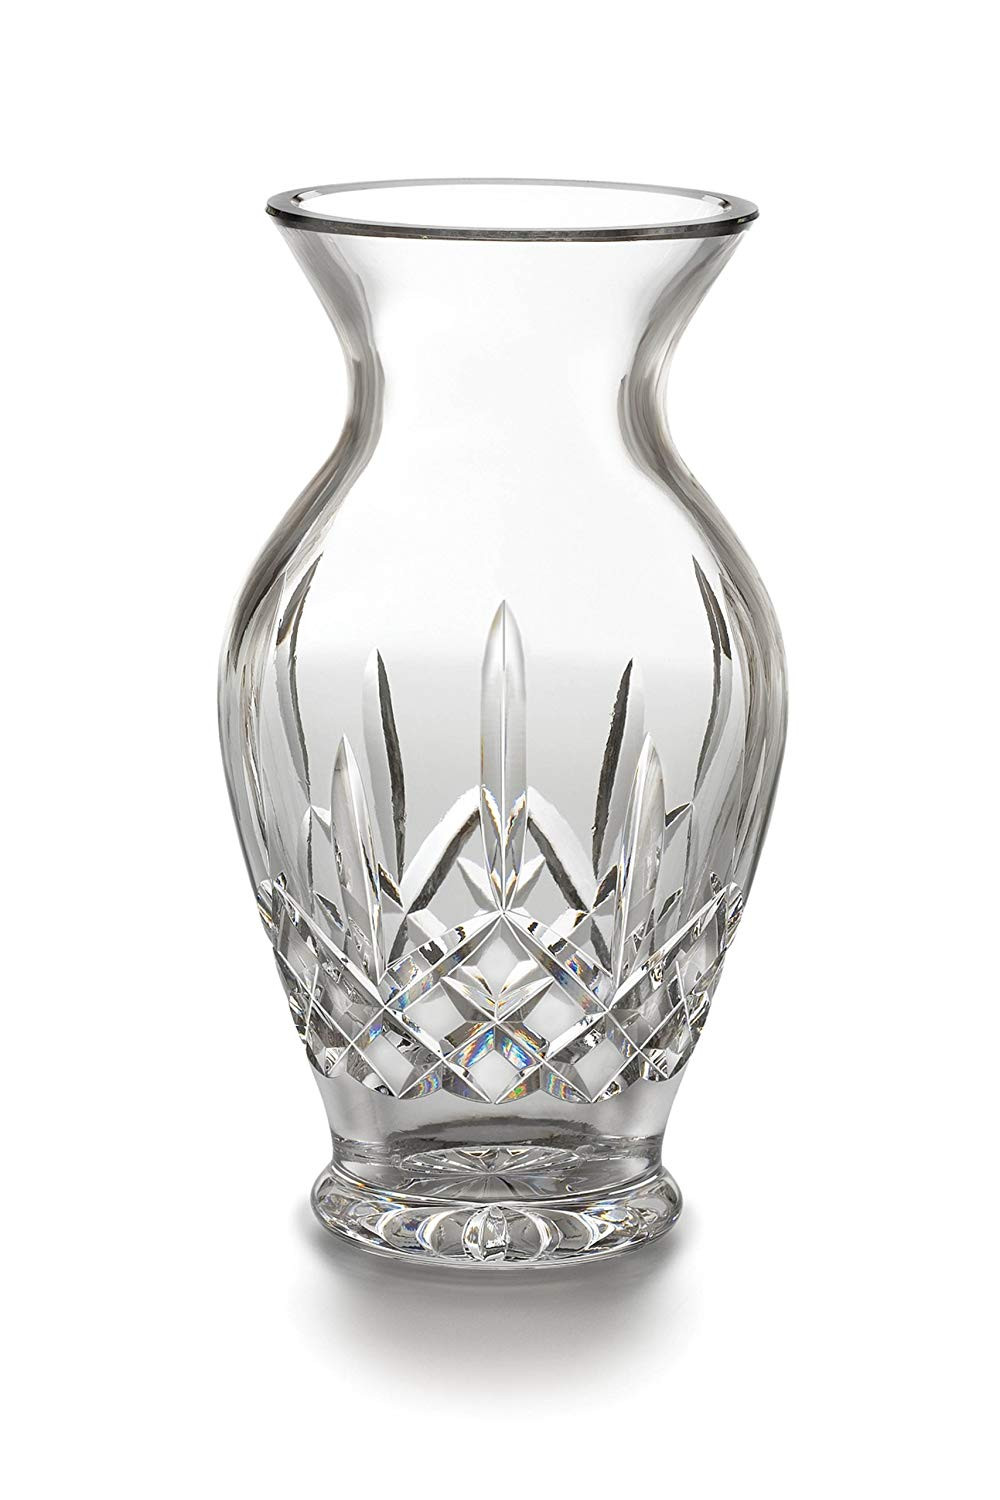 26 Lovable Marquis by Waterford Sheridan Flared 11 Inch Vase 2024 free download marquis by waterford sheridan flared 11 inch vase of amazon com waterford lismore 10 vase home kitchen with 81d jgb61dl sl1500